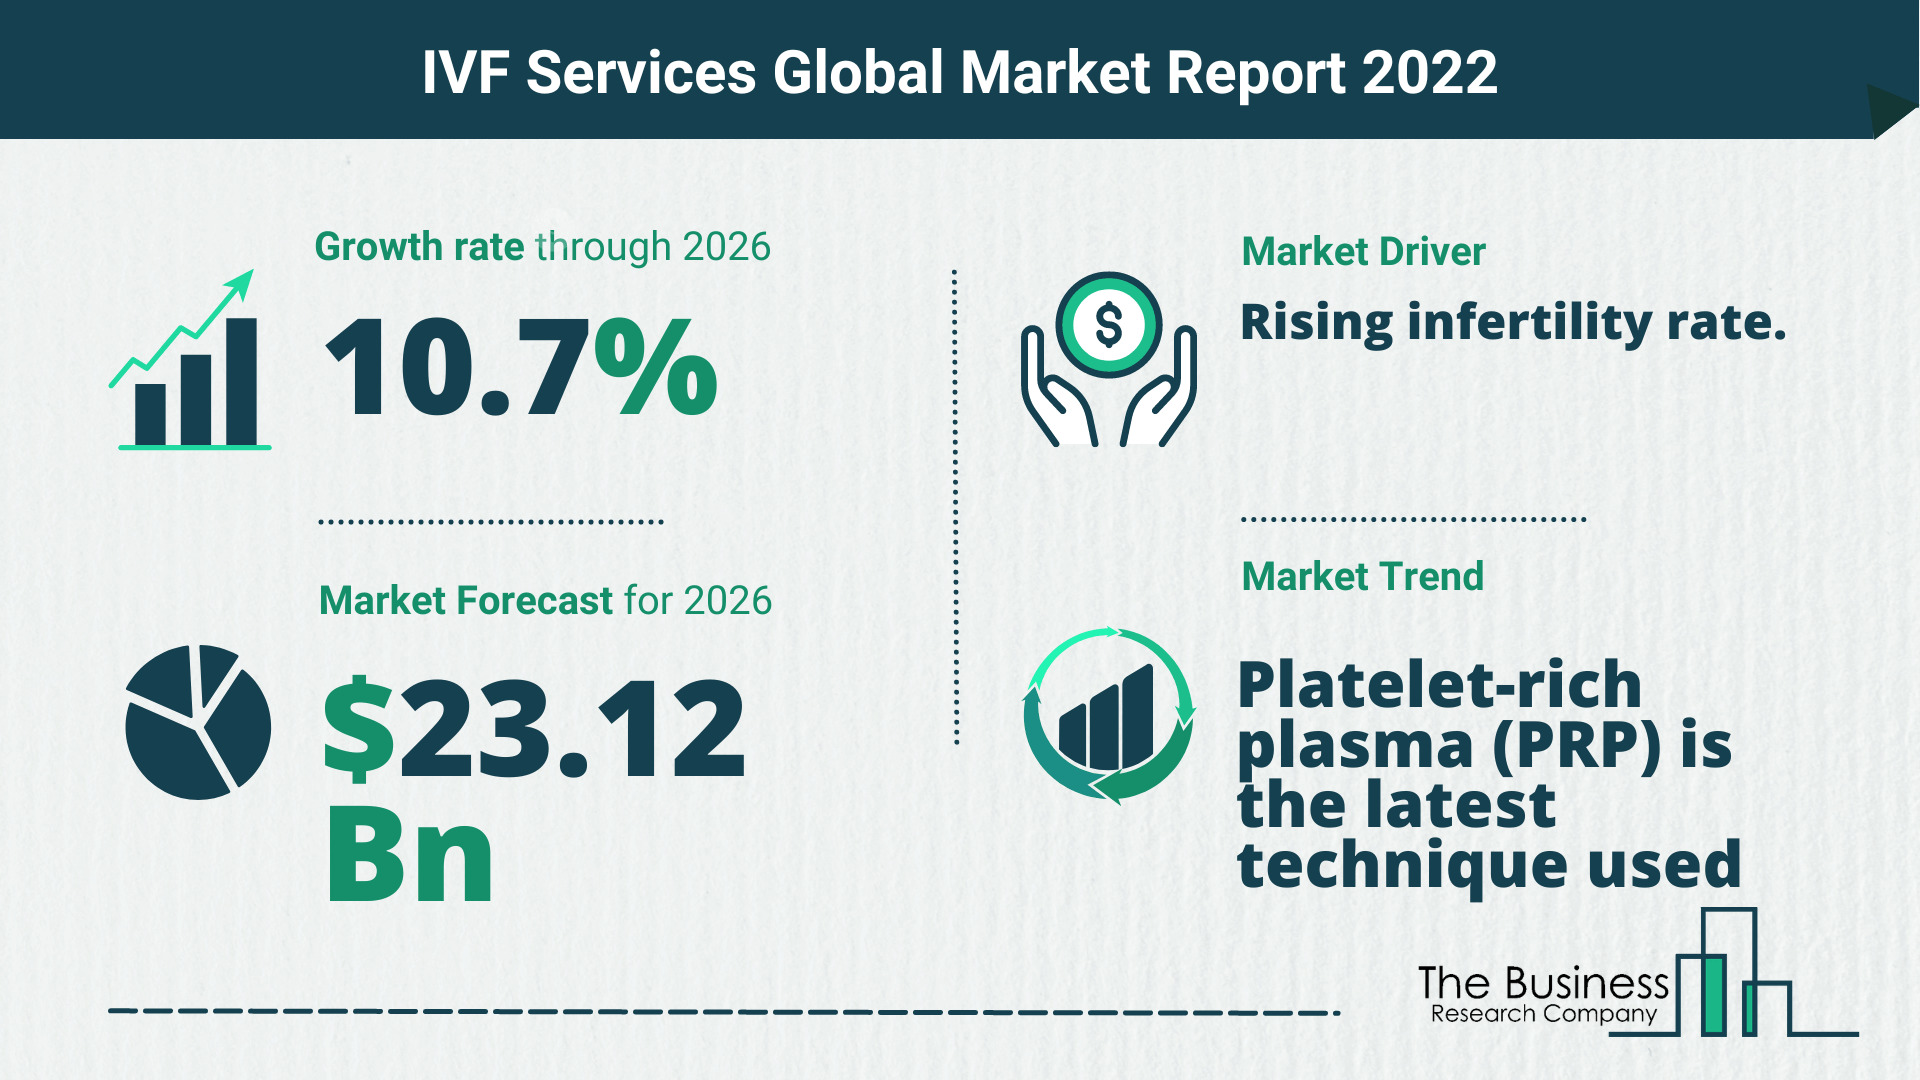 How Will The IVF Services Market Grow In 2022?